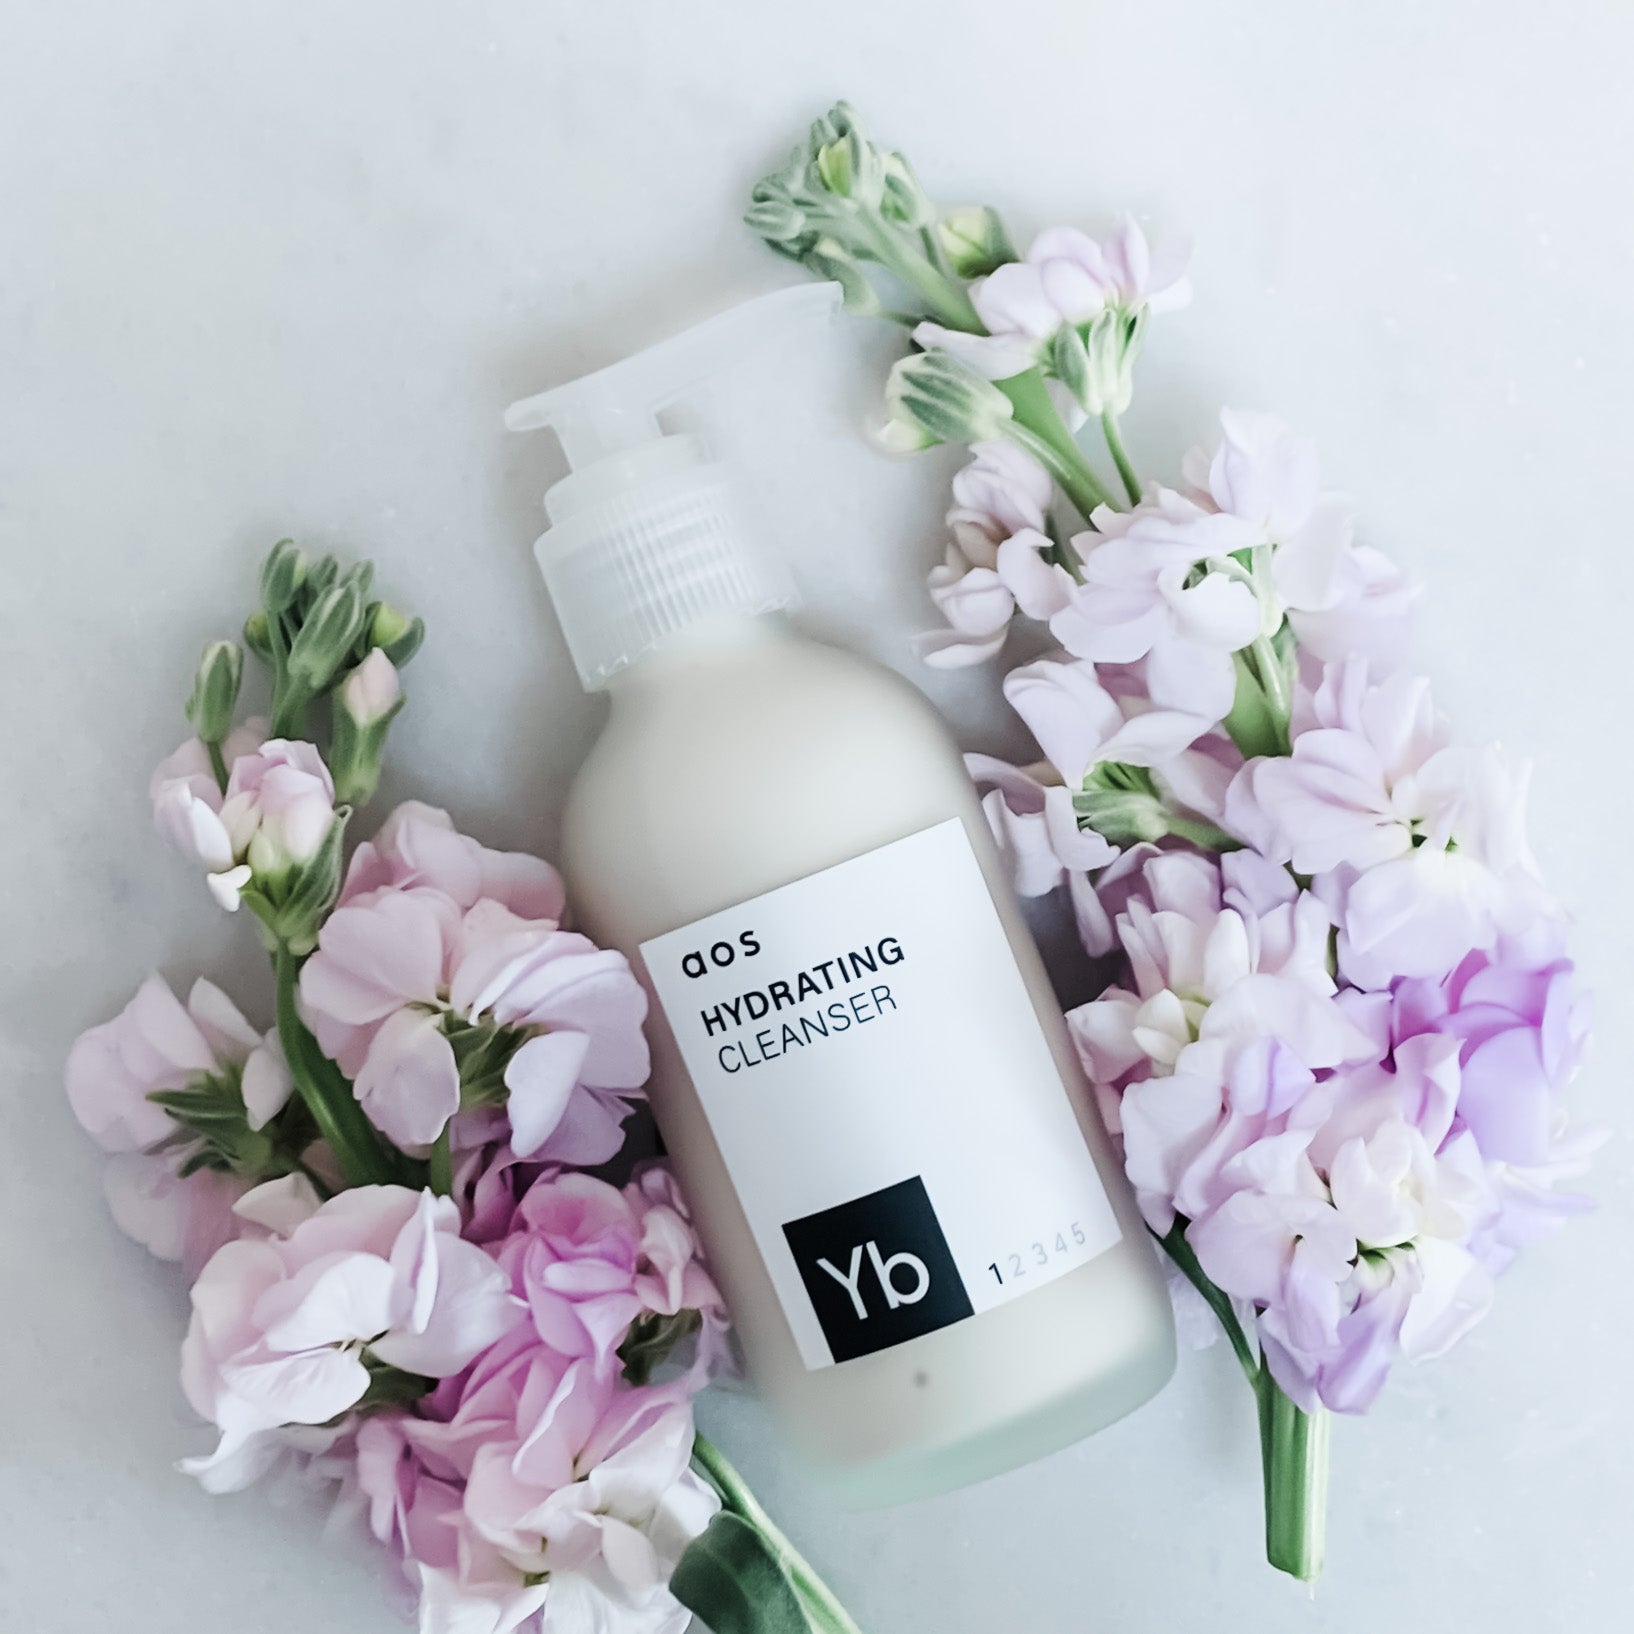 Youth in Bloom Hydrating Cleanser